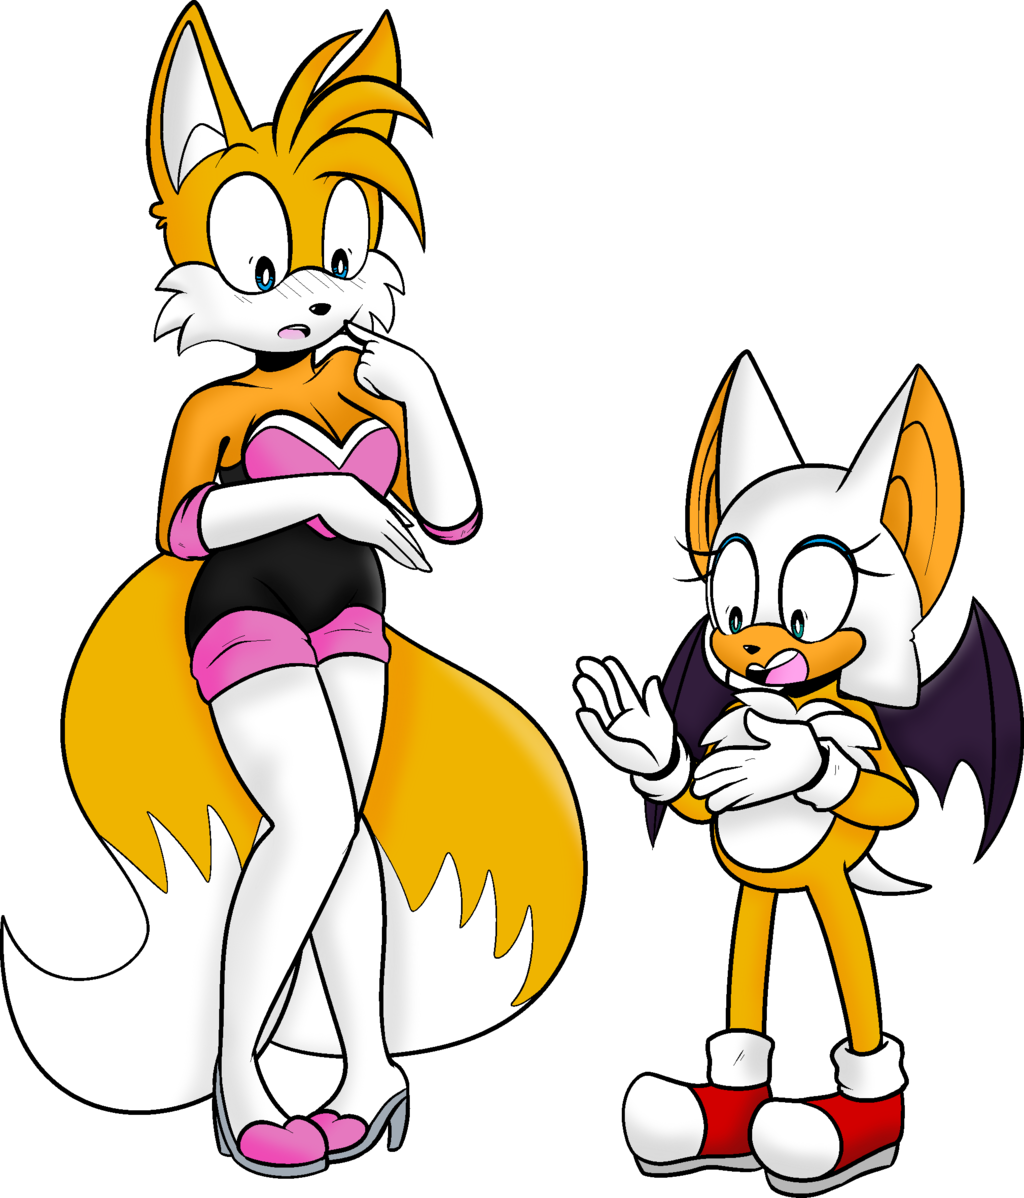 Tails and Rouge from the new SA2 mod https://www.youtube.com/watch?v=EwHIw2...